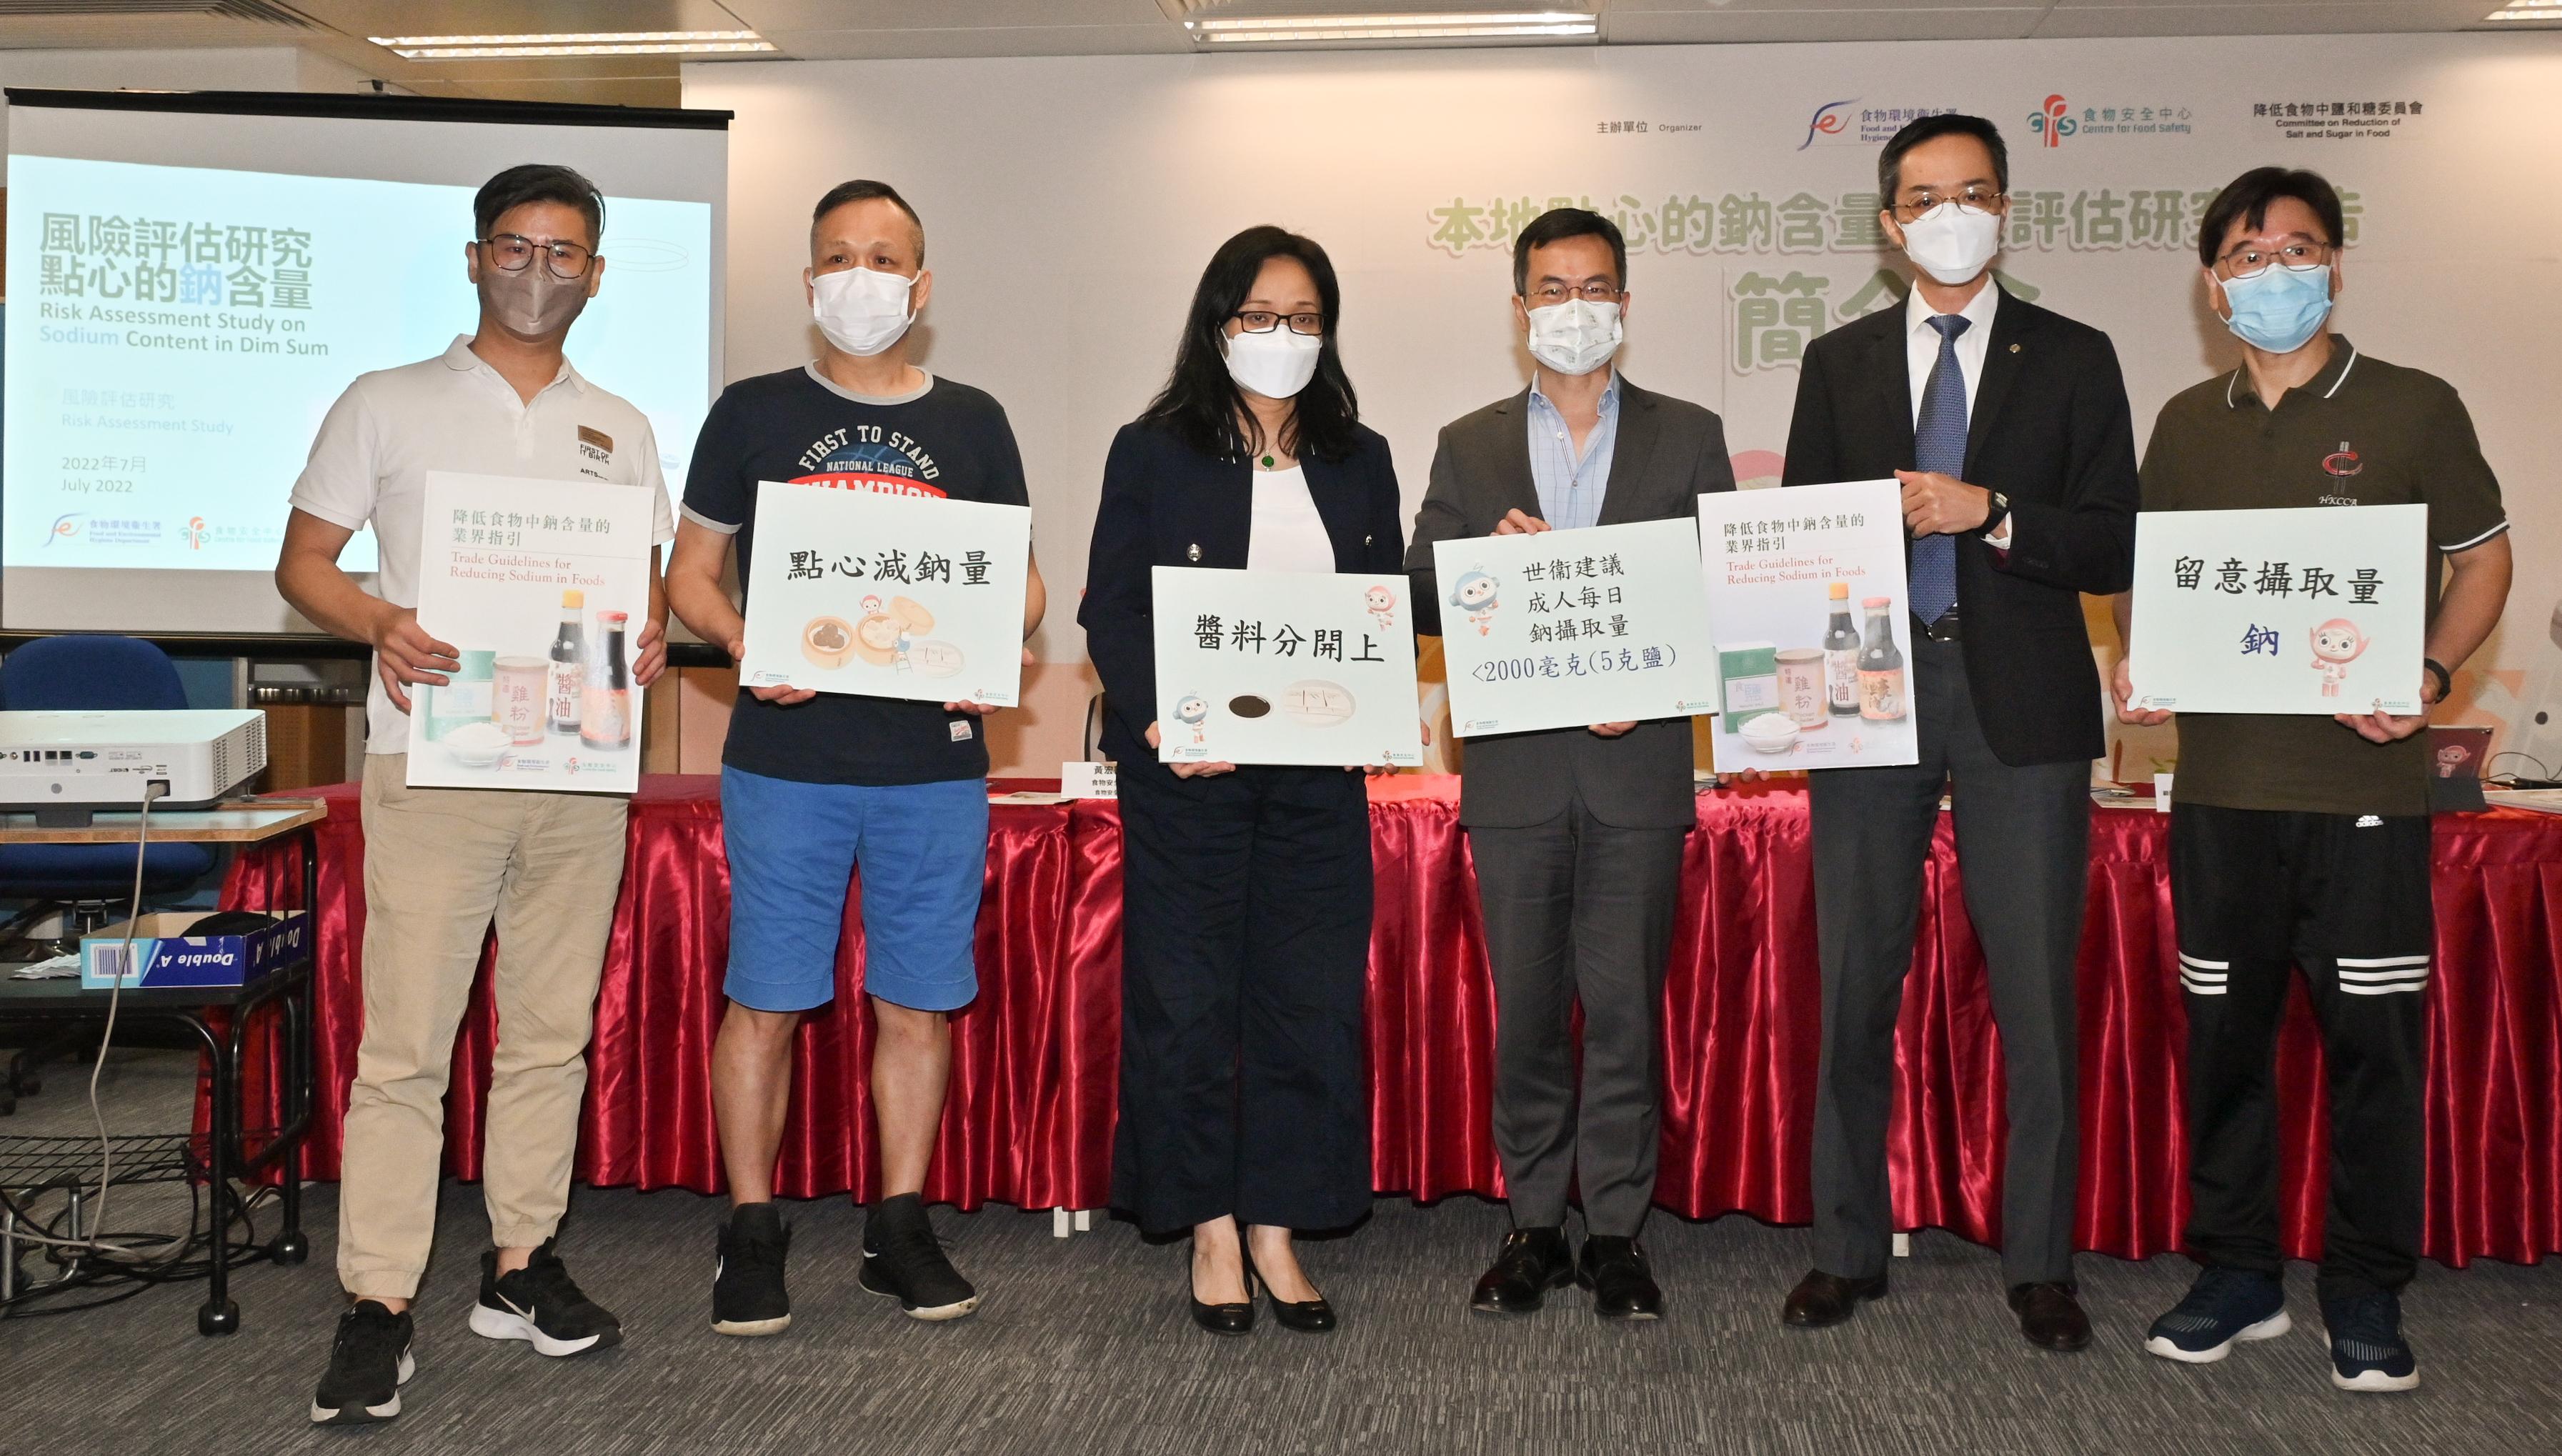 The Centre for Food Safety (CFS) of the Food and Environmental Hygiene Department (FEHD) today (July 12) released the study results on the sodium content in dim sum. Photo shows the Chairperson of the Committee on Reduction of Salt and Sugar in Food, Mr Cheung Leong (third right); the Controller of the CFS of the FEHD, Dr Christine Wong (third left); the Consultant (Community Medicine) (Risk Assessment and Communication) of the CFS, Dr Samuel Yeung (second right); the President of the Hong Kong Chinese Chefs Association, Mr William Ma (first right); Senior Instructor of the Chinese Culinary Institute Mr Tony Chow (first left); and dim sum chef Mr Mak Kwai-pui (second left) attending a media briefing to remind the public to avoid excessive intake of sodium.